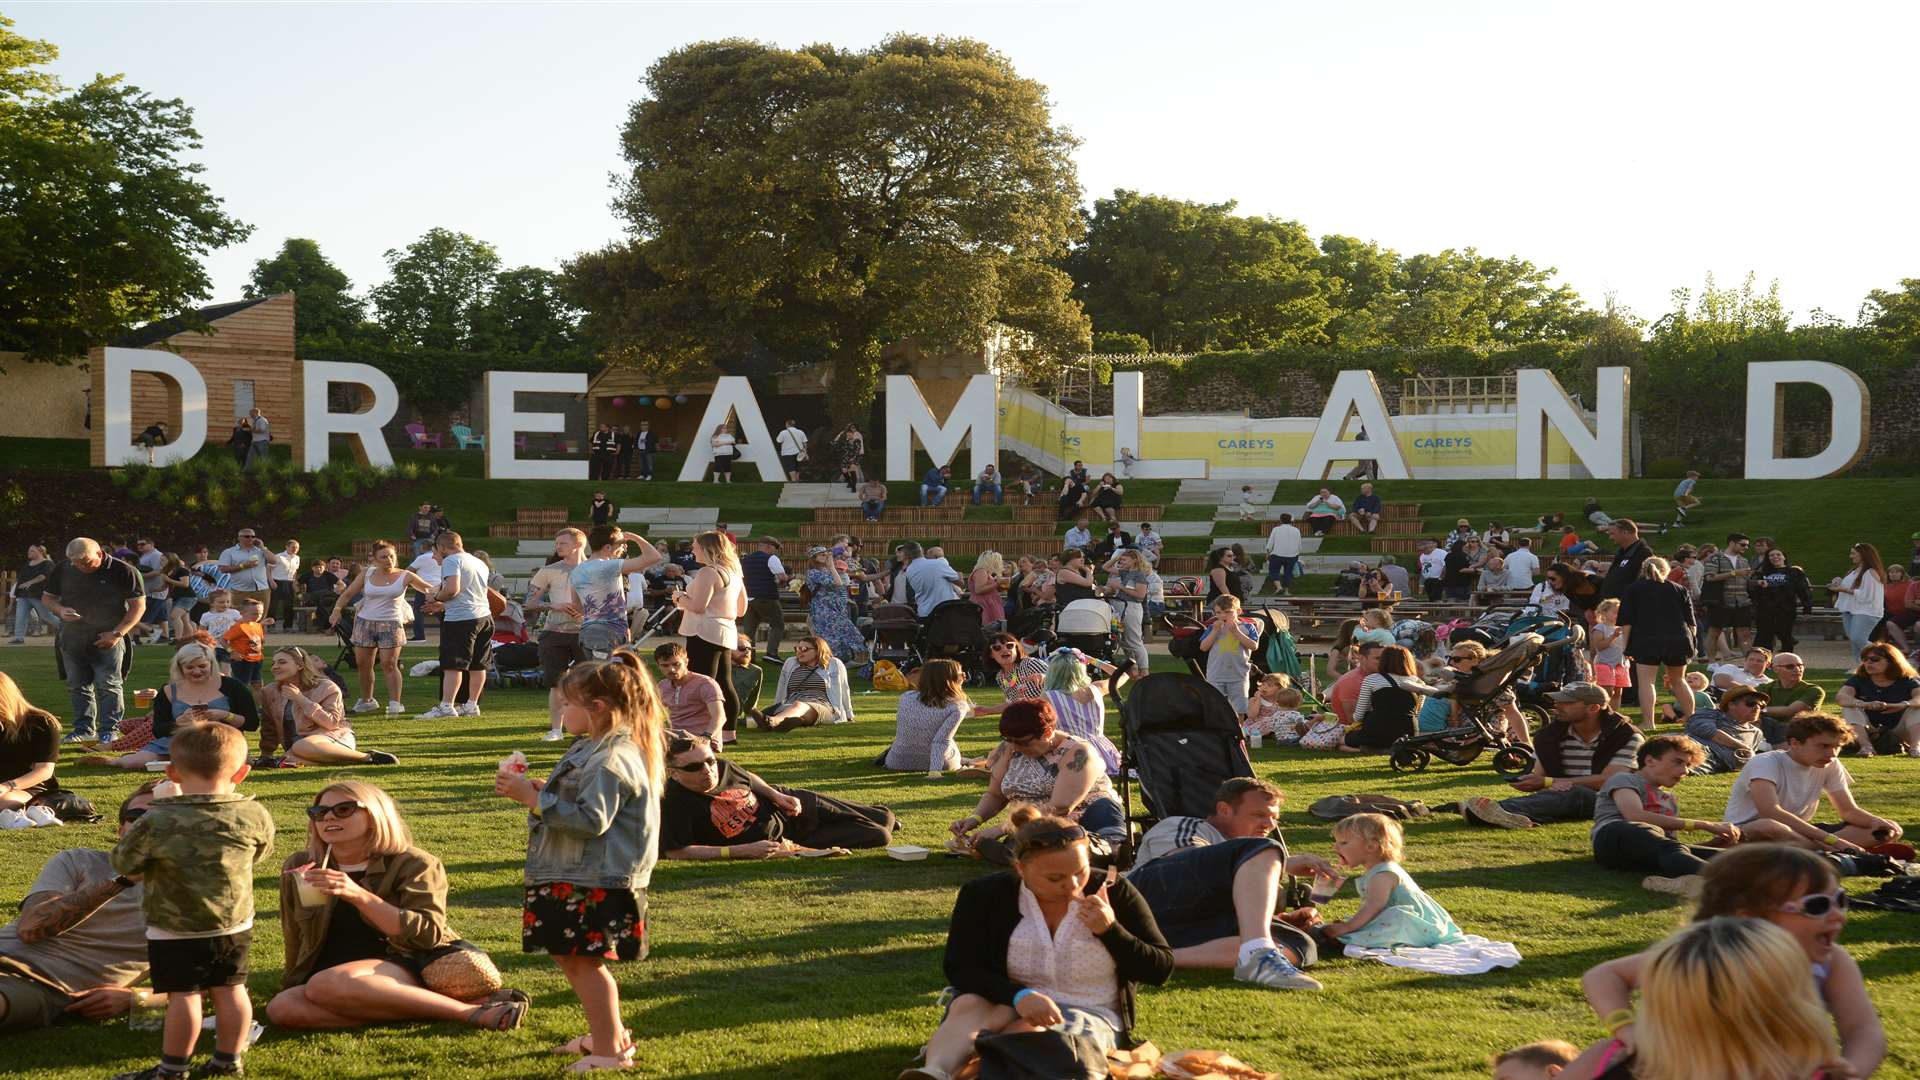 Summer events have helped secure Dreamland's future